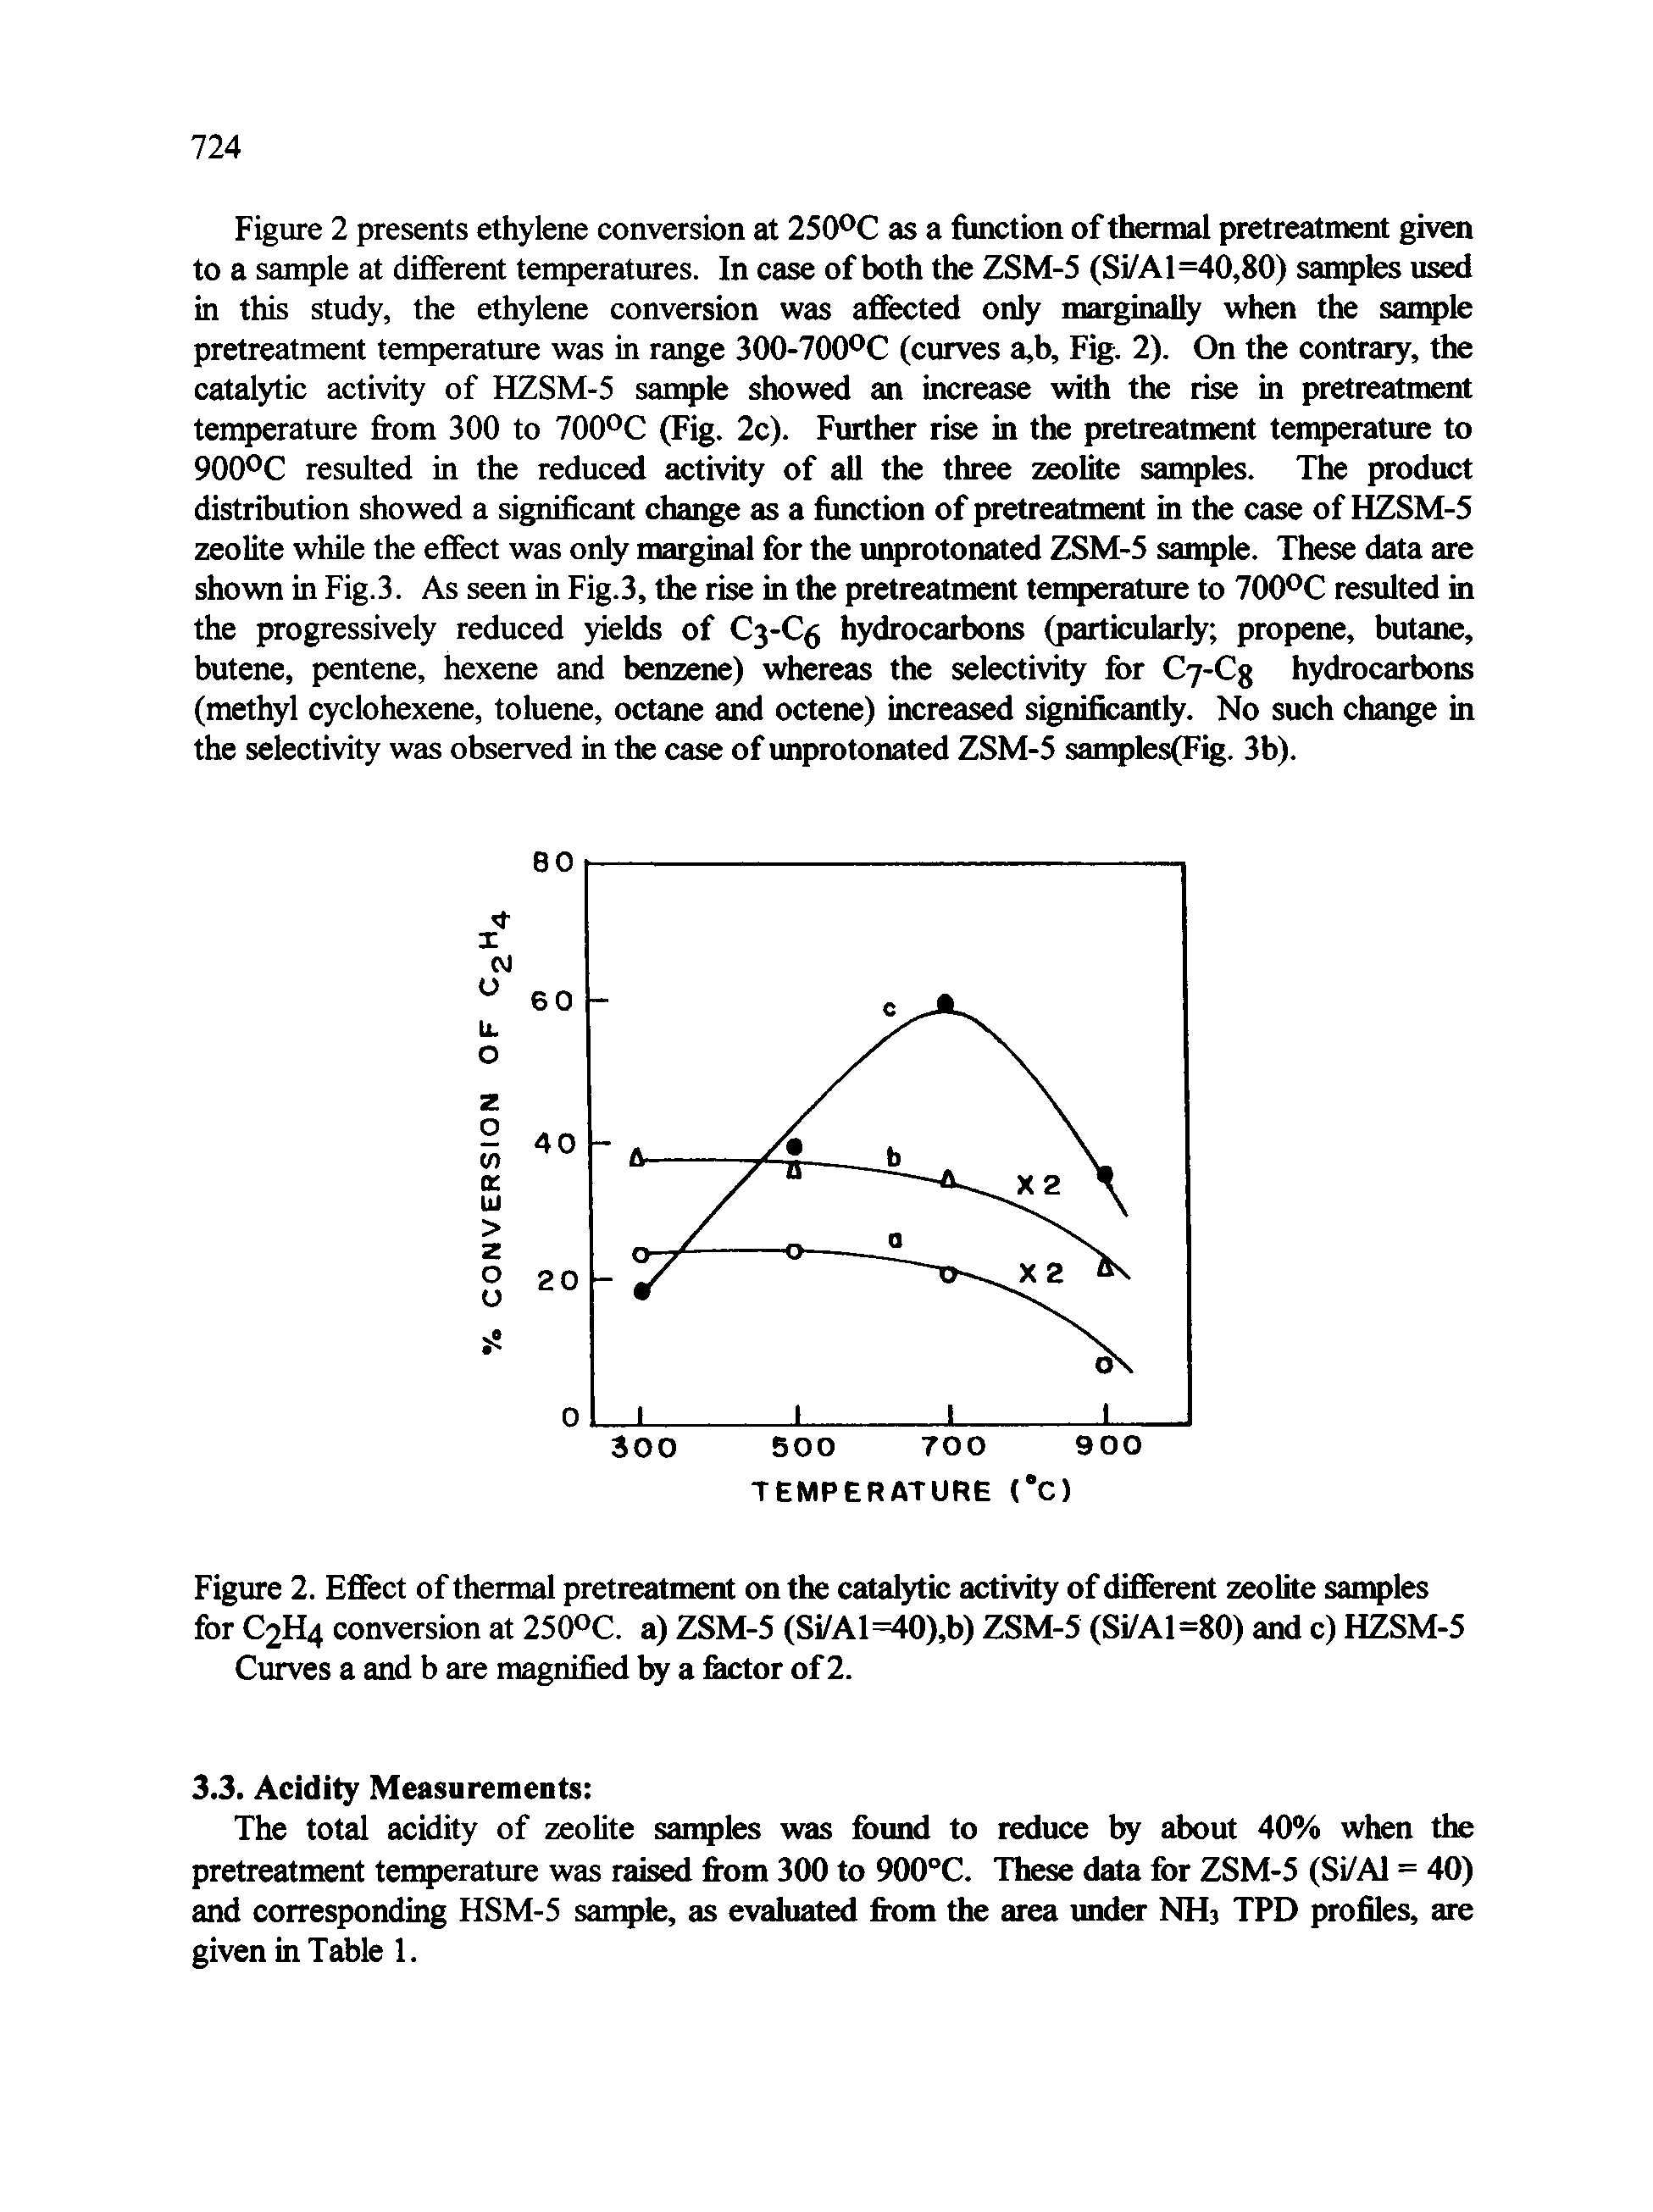 Figure 2 presents ethylene conversion at 250 C as a function of thermal pretreatment given to a sample at different temperatures. In case of both the ZSM-5 (Si/Al=40,80) samples used in this study, the ethylene conversion was affected only marginally when the san )le pretreatment temperature was in range 300-700 C (curves a,b. Fig. 2). On the contrary, the catalytic activity of HZSM-5 sample showed an increase with the rise in pretreatment temperature from 300 to 700°C (Fig. 2c). Further rise in the pretreatment temperature to 900°C resulted in the reduced activity of all the three zeolite samples. The product distribution showed a significant change as a function of pretreatment in the case of HZSM-5 zeolite while the effect was only marginal for the improtonated ZSM-5 sample. These data are shown in Fig.3. As seen in Fig.3, the rise in the pretreatment temperature to 700°C resulted in the progressively reduced yields of C3-C5 hydrocarbons (particularly propene, butane, butene, pentene, hexene and benzene) whereas the selectivity for C7-C8 hydrocarbons (methyl cyclohexene, toluene, octane and octene) increased significantly. No such change in the selectivity was observed in the case of improtonated ZSM-5 samples(Fig. 3b).